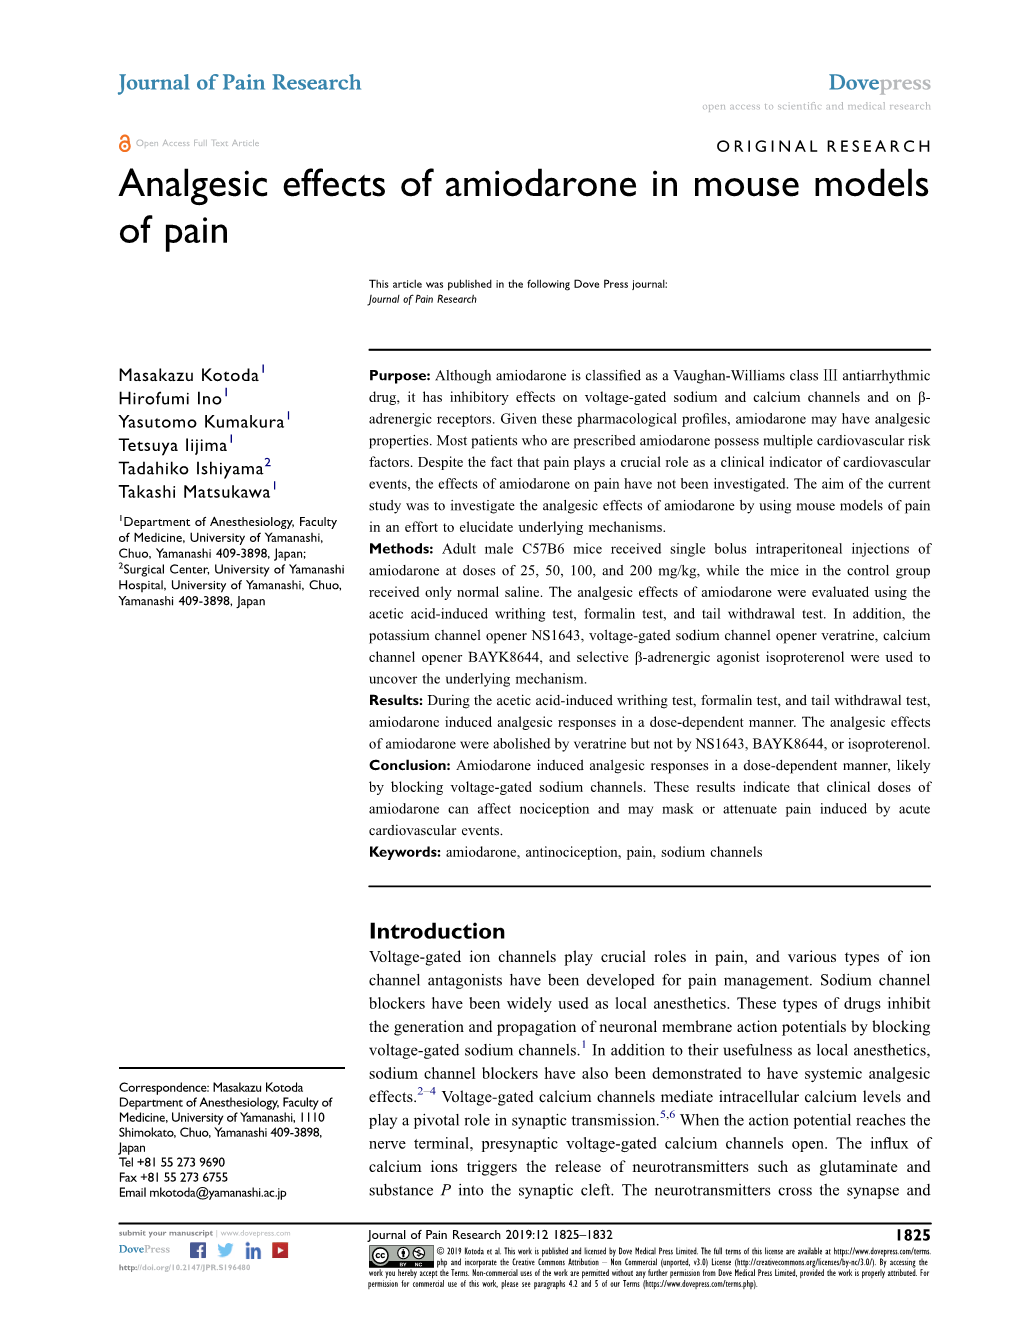 Analgesic Effects of Amiodarone in Mouse Models of Pain